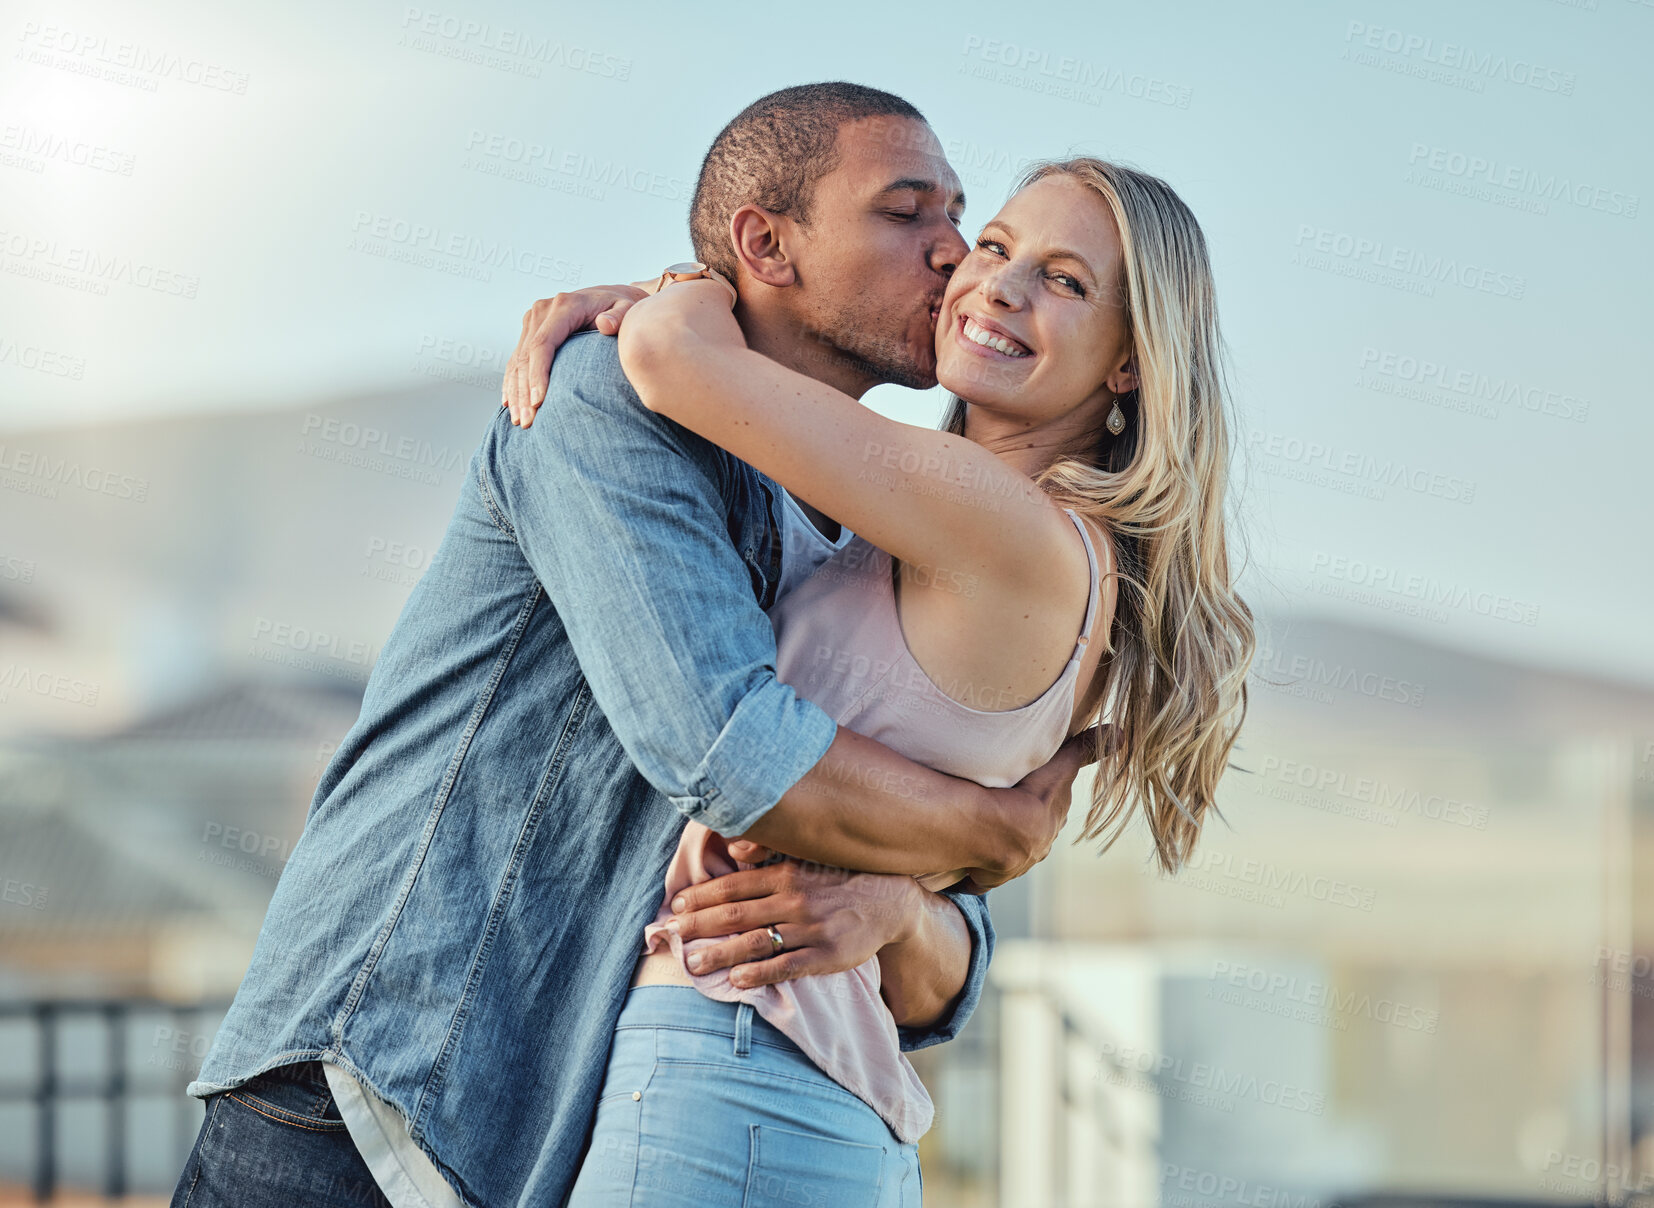 Buy stock photo Interracial man and woman, love and kiss outside feeling happy, in love and caring in the city. Romance, romantic and boyfriend and girlfriend embracing, hugging and kissing with affection in town